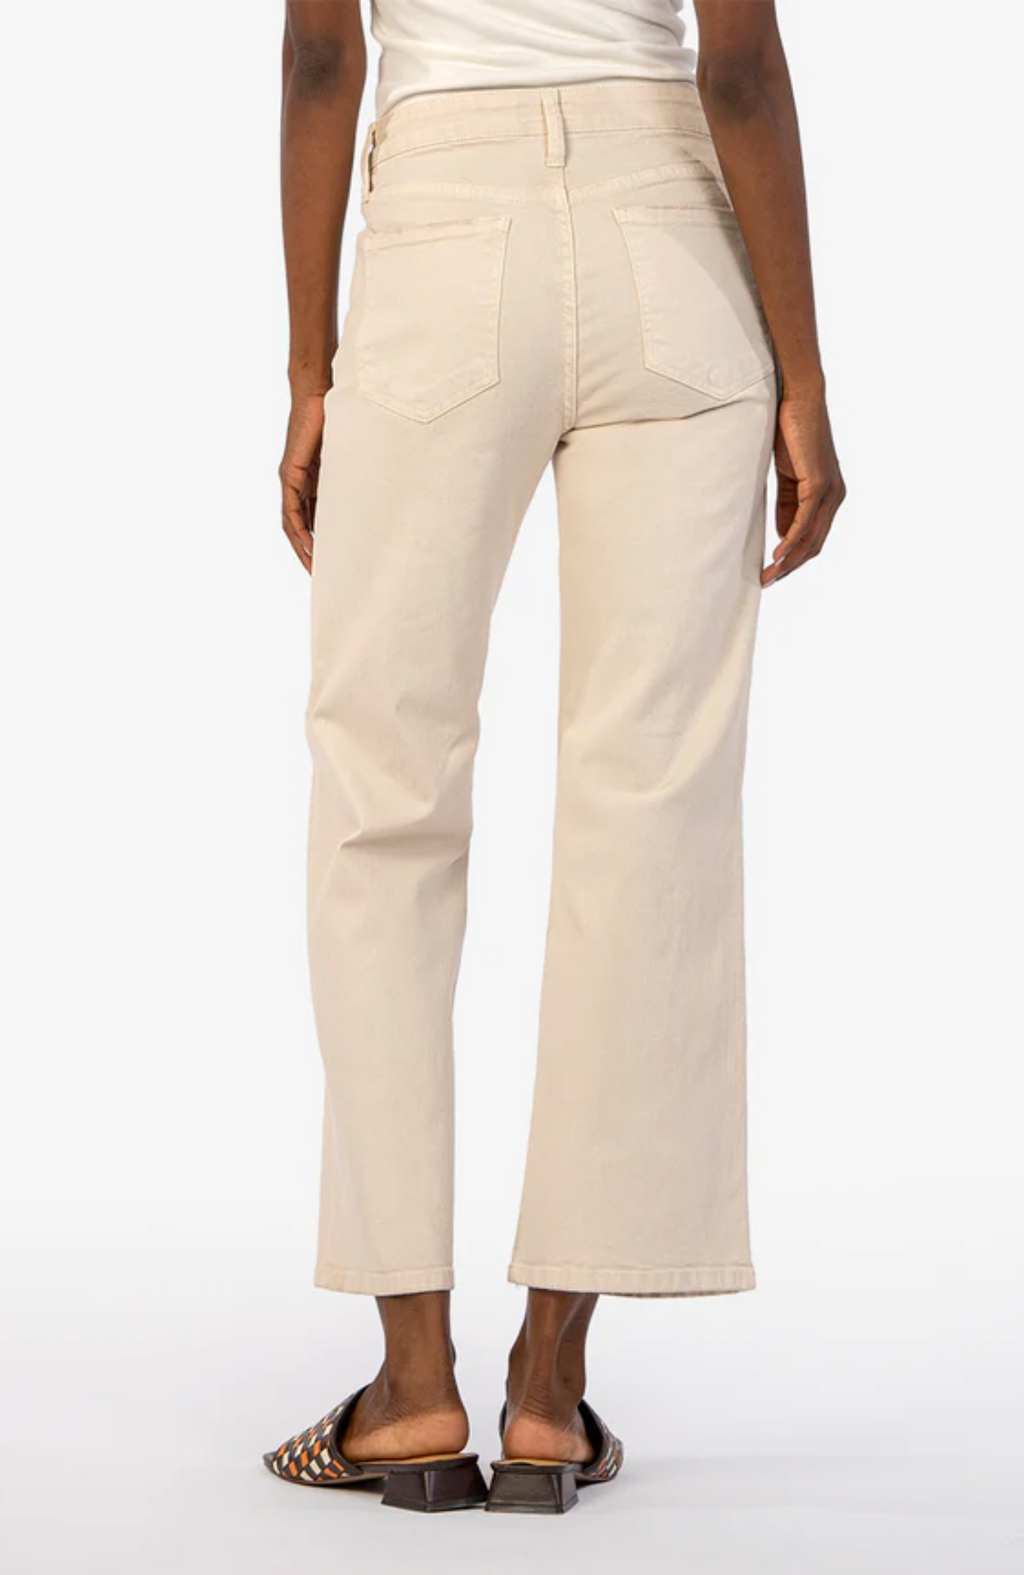 Kut From The Kloth - Charlotte High Rise Fab Ab Culottes